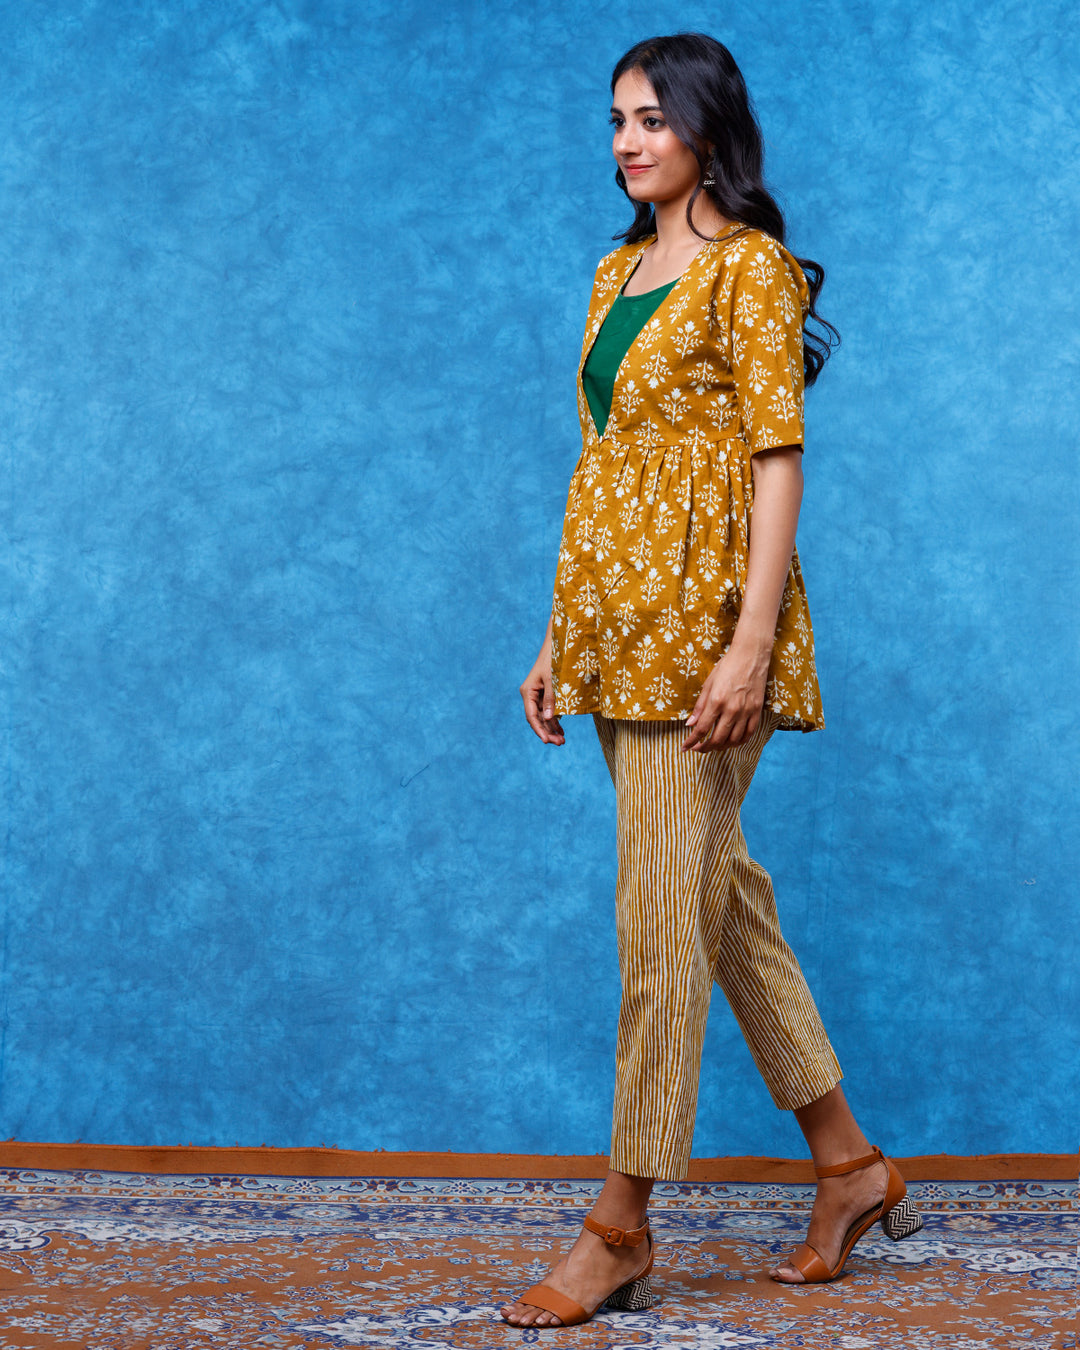 Ochre Jacket & Pants Coord Set With Emerald Top - Set of 3